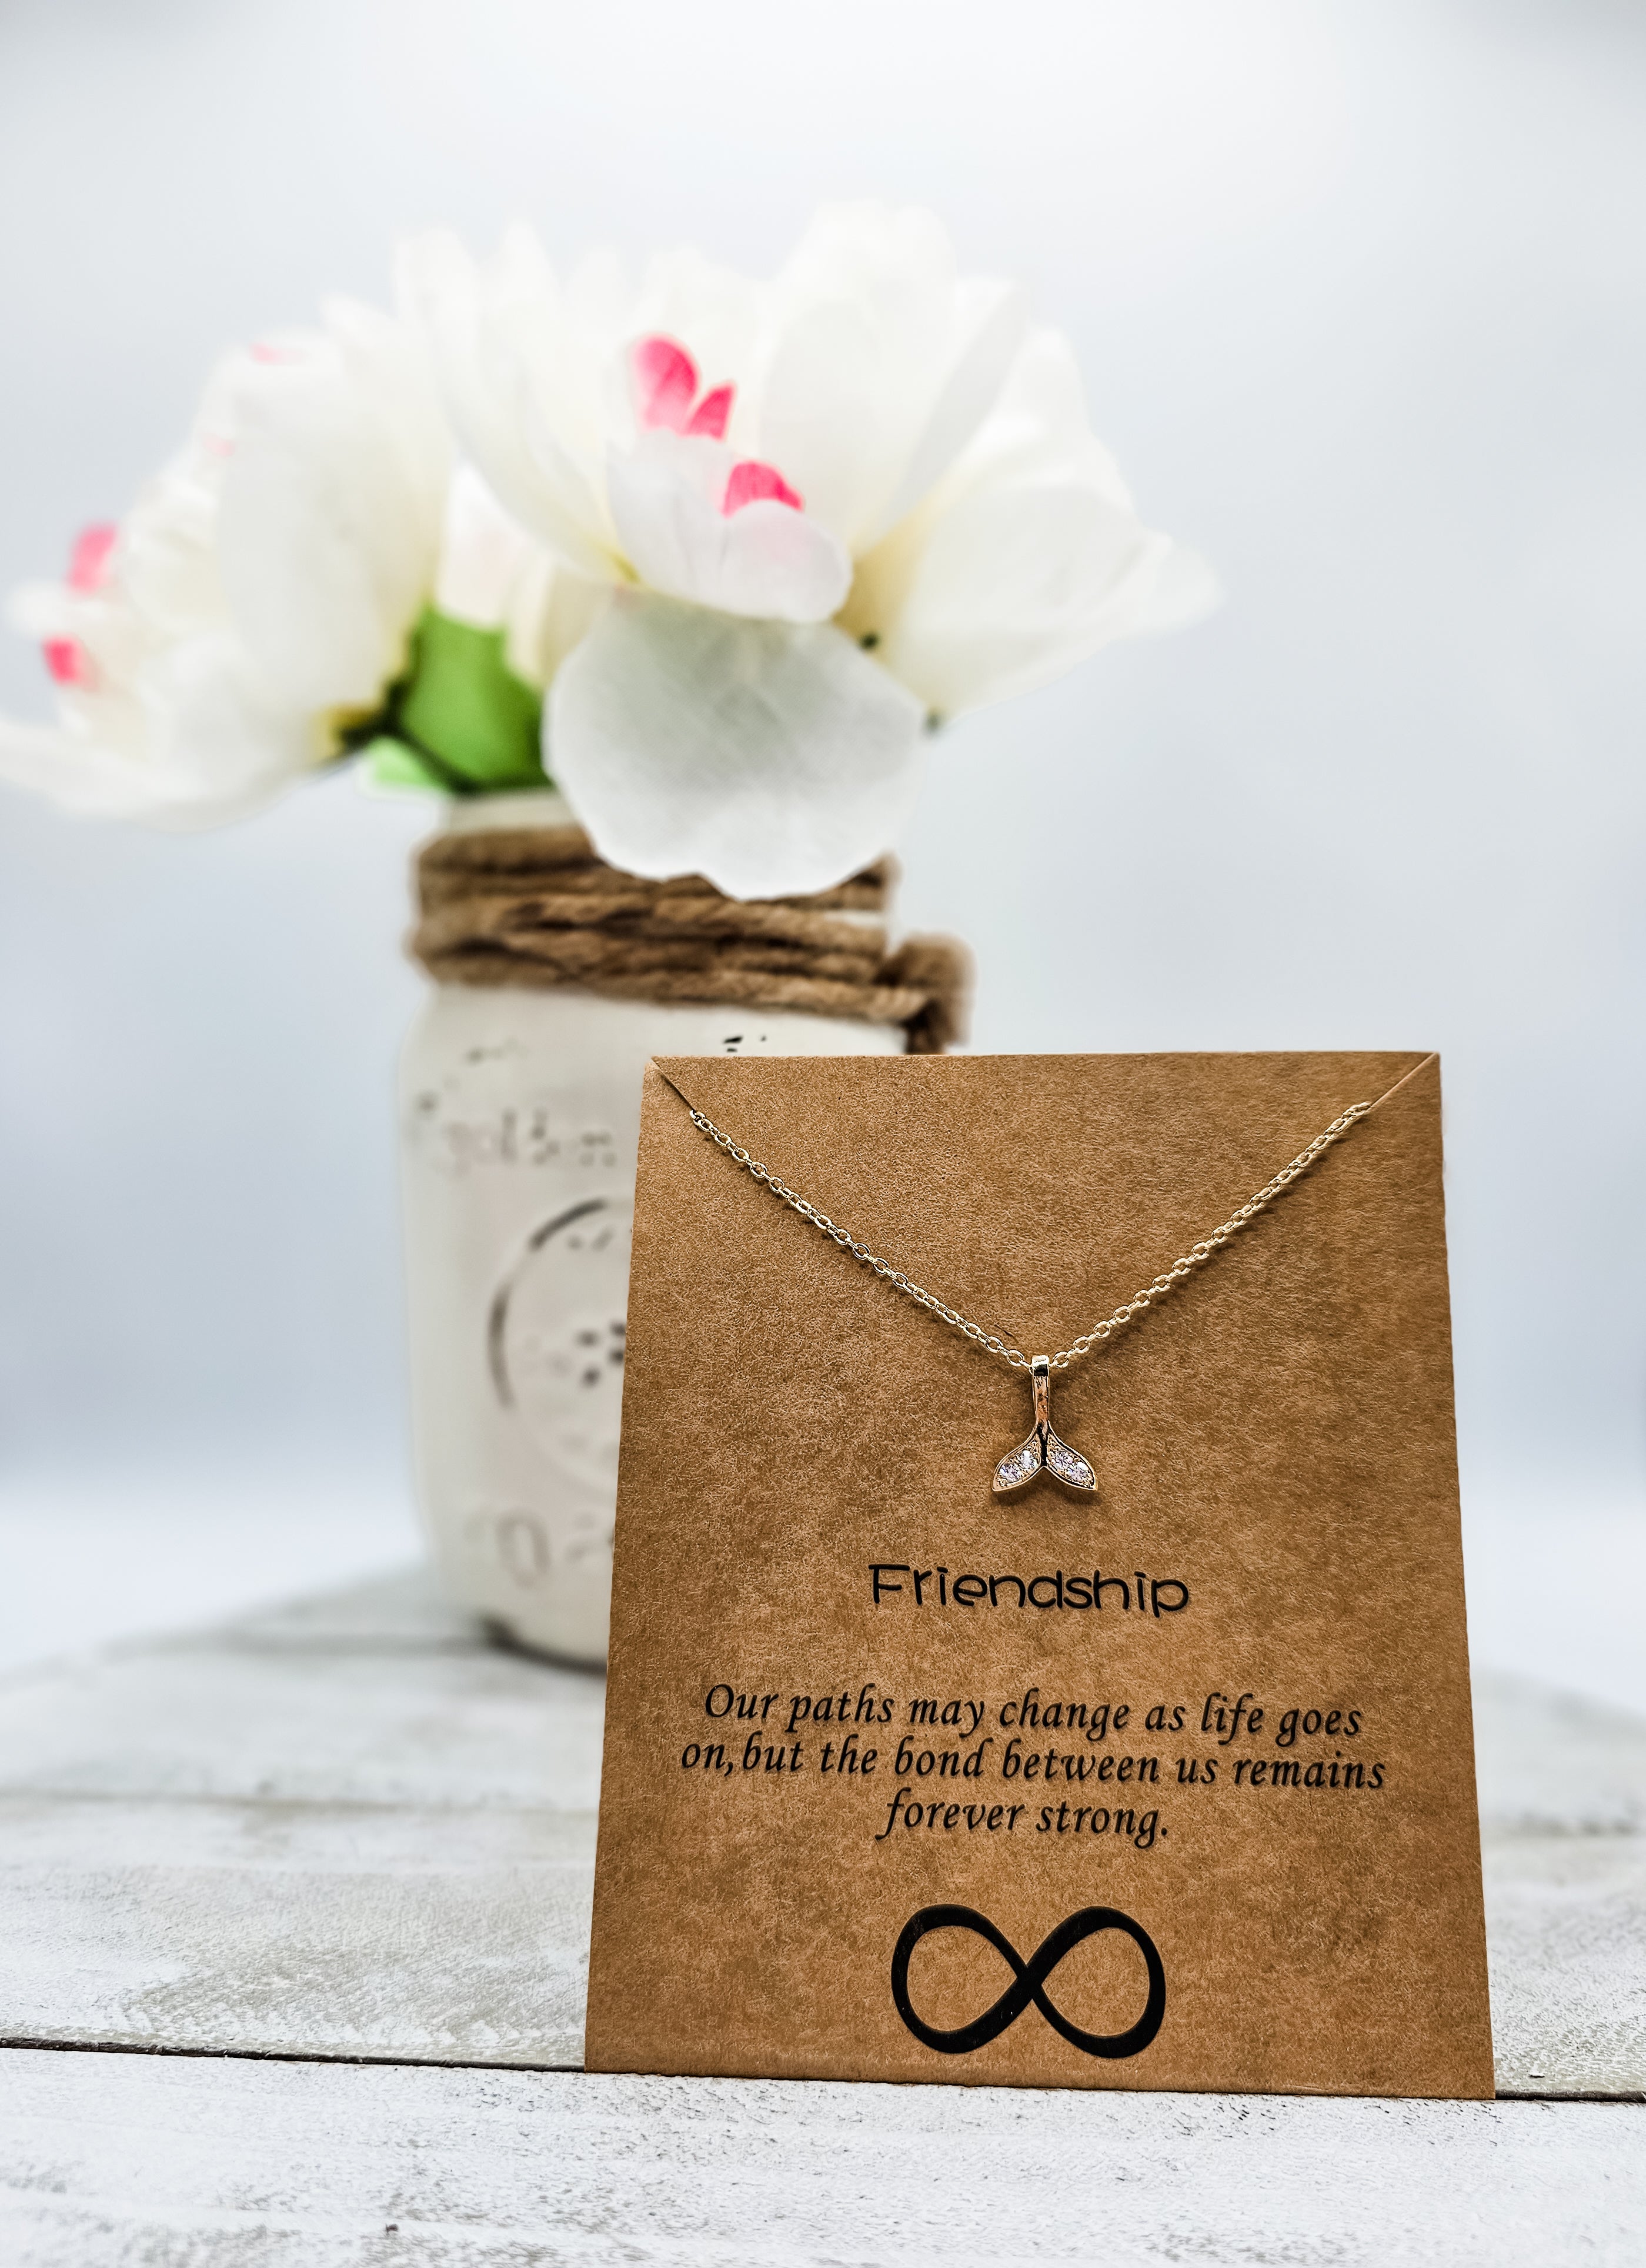 Friendship - Inspirational and Meaningful Pendant Necklace